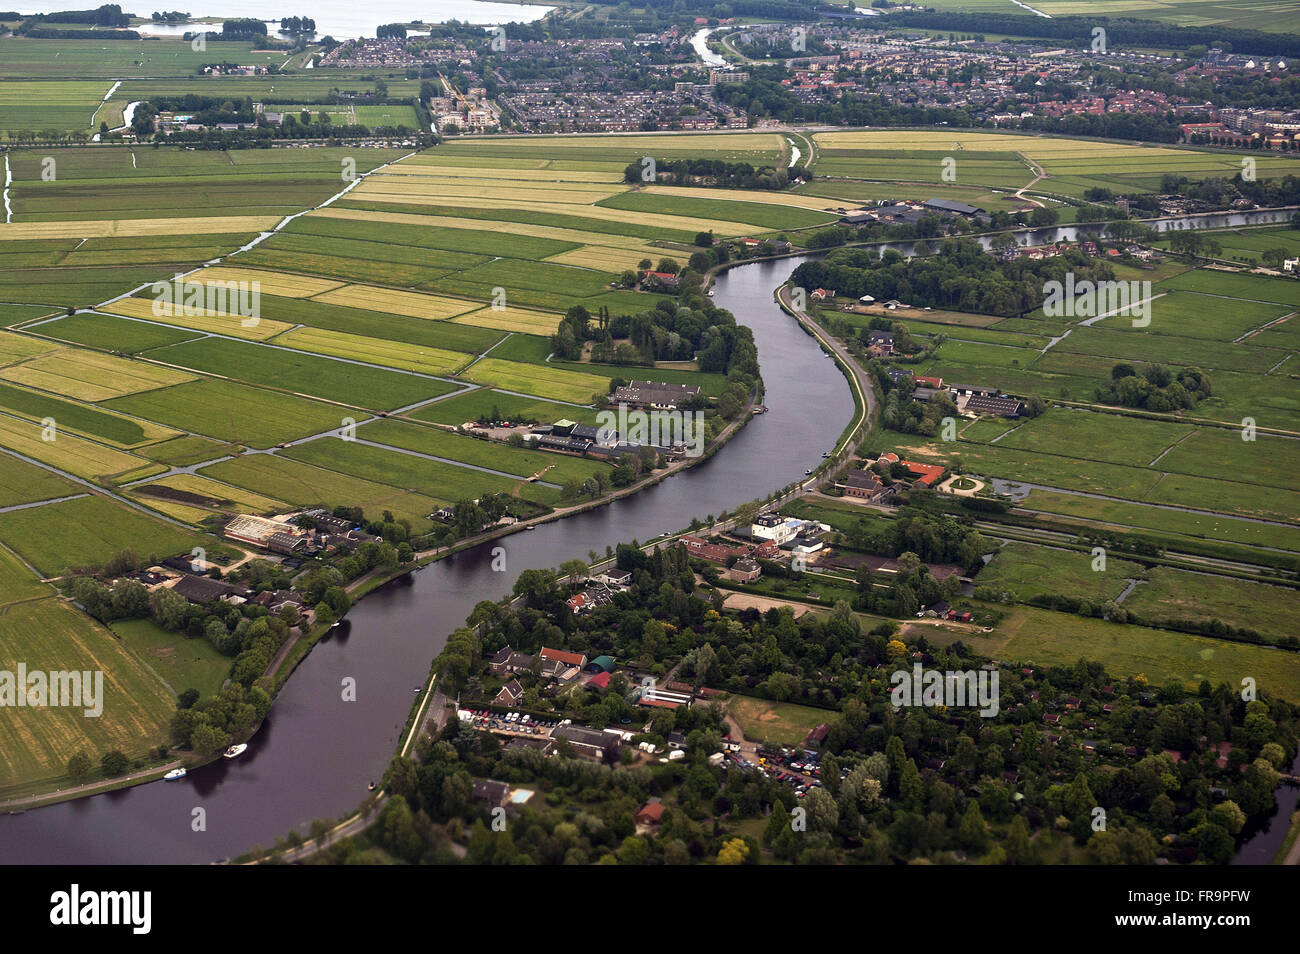 Top view of canal and agricultural area in the outskirts of the city of Amsterdam Stock Photo